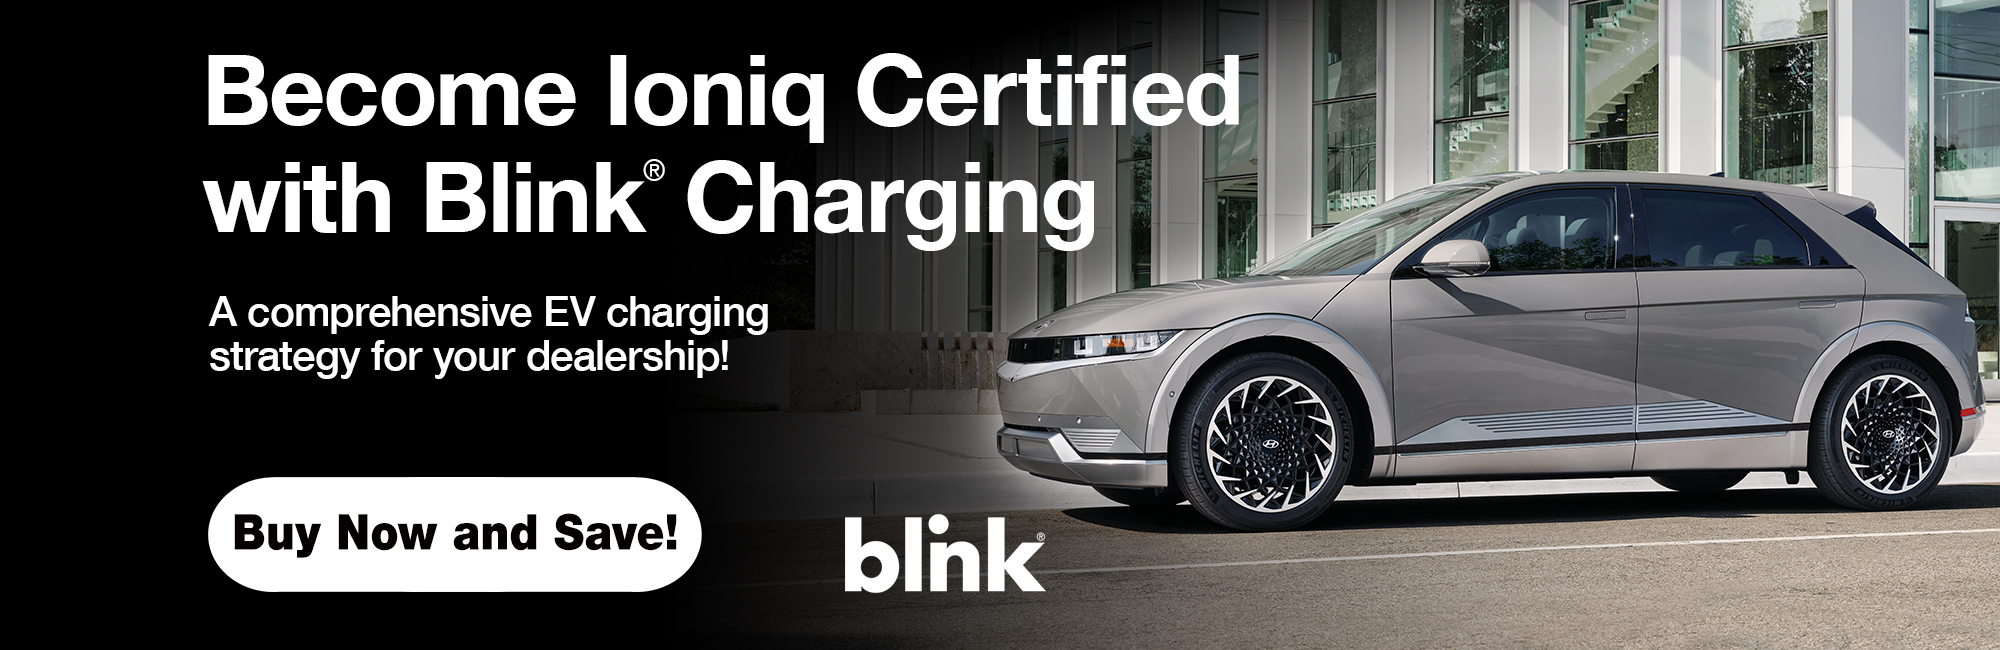 Become Ioniq certified with Blink